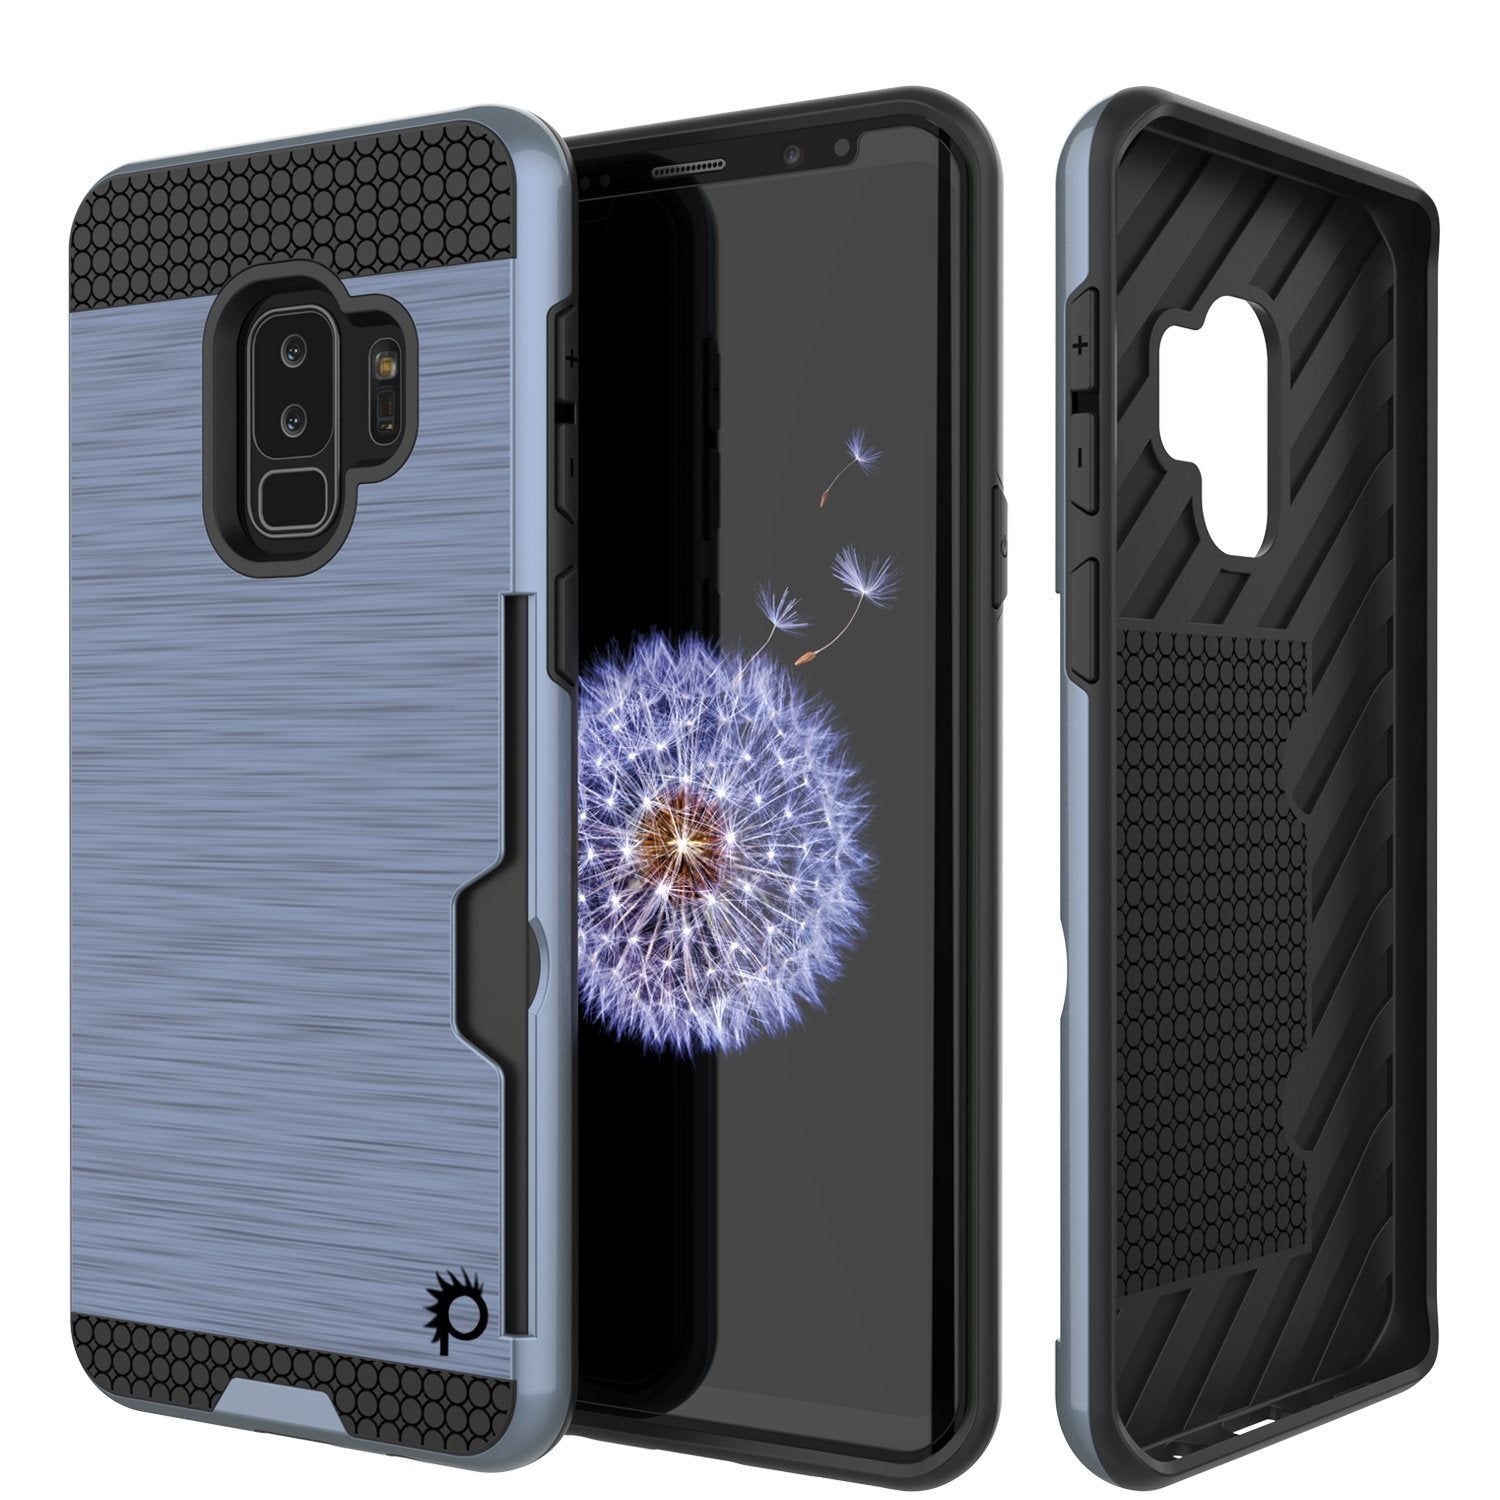 Galaxy S9 Plus Case, PUNKcase [SLOT Series] [Slim Fit] Dual-Layer Armor Cover w/Integrated Anti-Shock System, Credit Card Slot [Navy] - PunkCase NZ